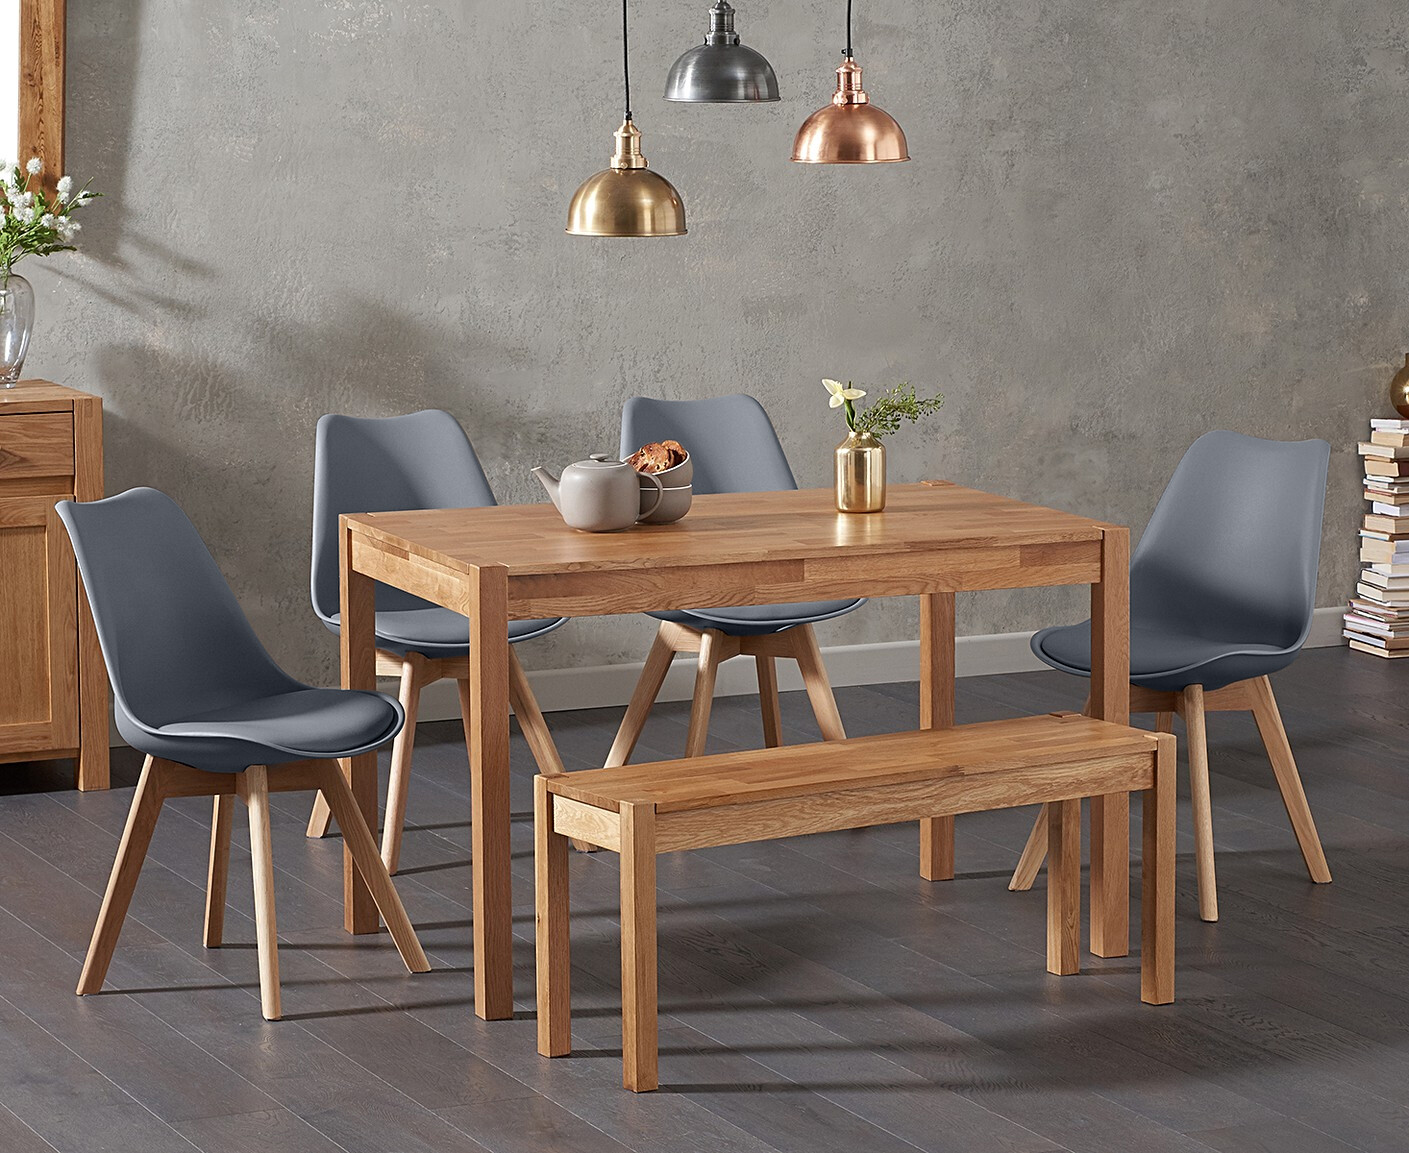 York 120cm Solid Oak Dining Table With 2 Dark Grey Orson Faux Leather Chairs And 1 York Bench